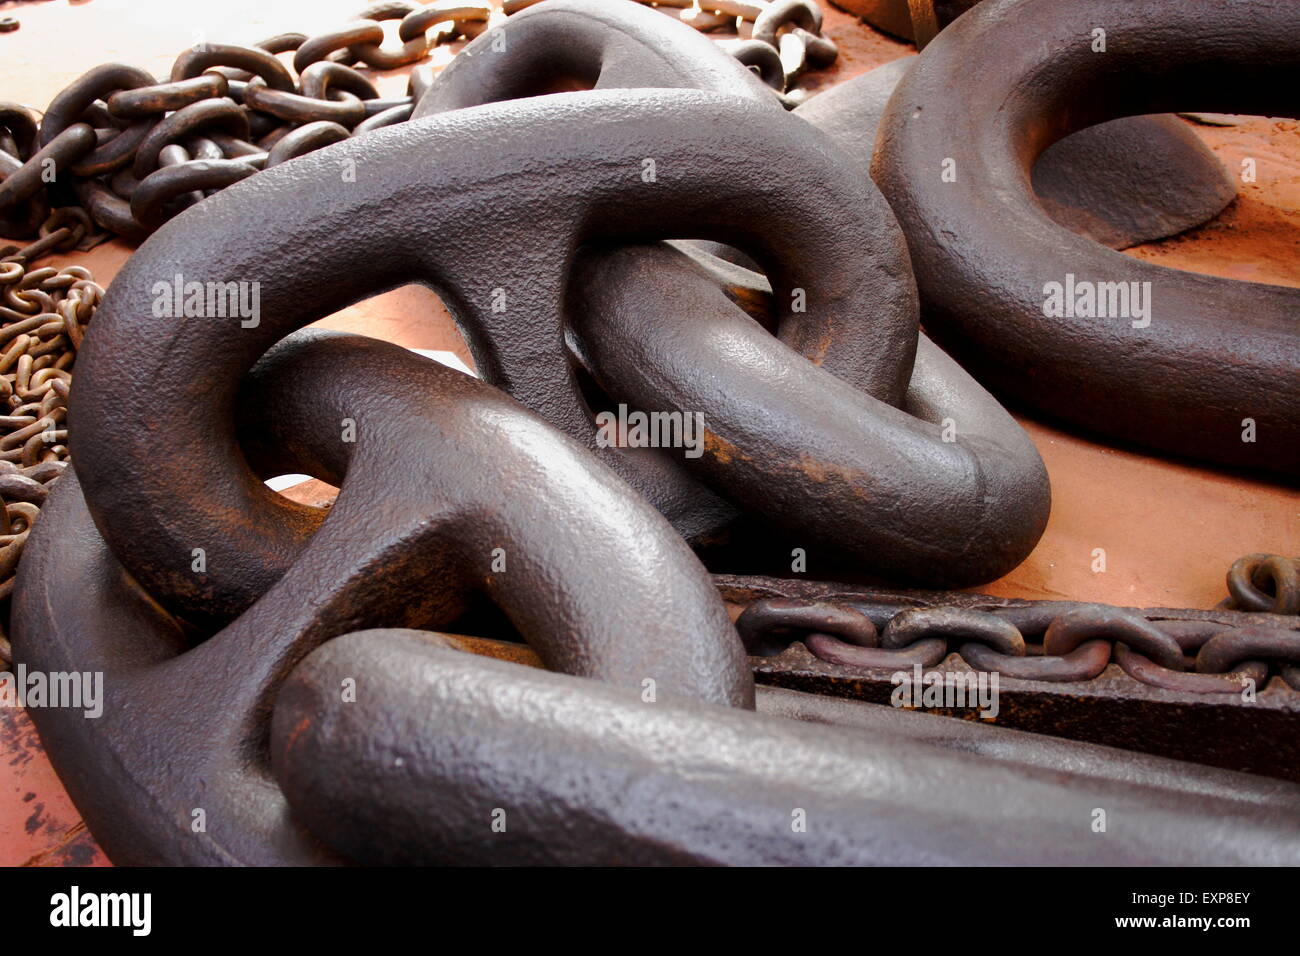 Black country industrial chain making huge large iron steel chain links Stock Photo